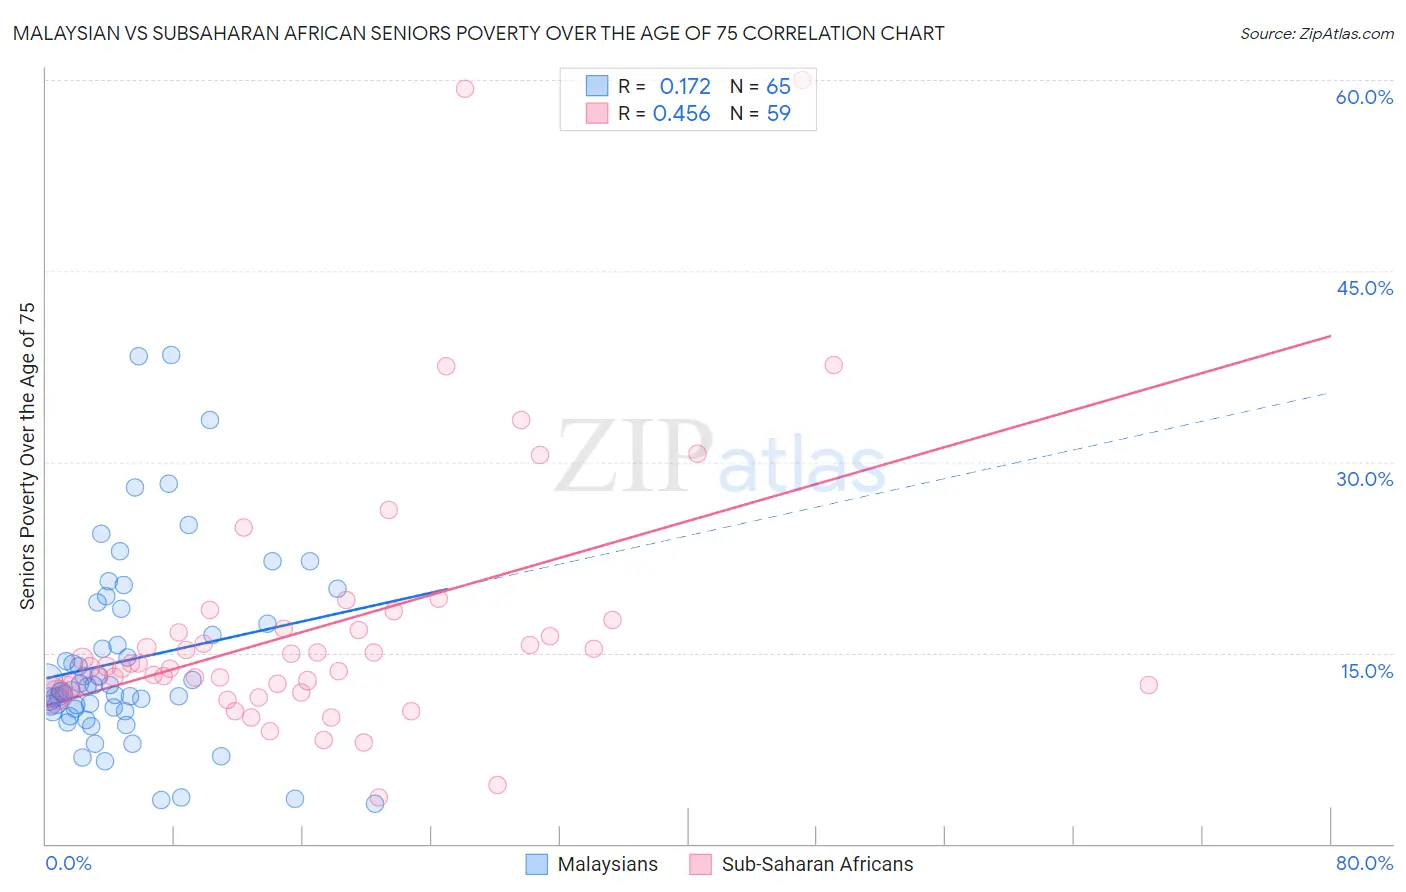 Malaysian vs Subsaharan African Seniors Poverty Over the Age of 75